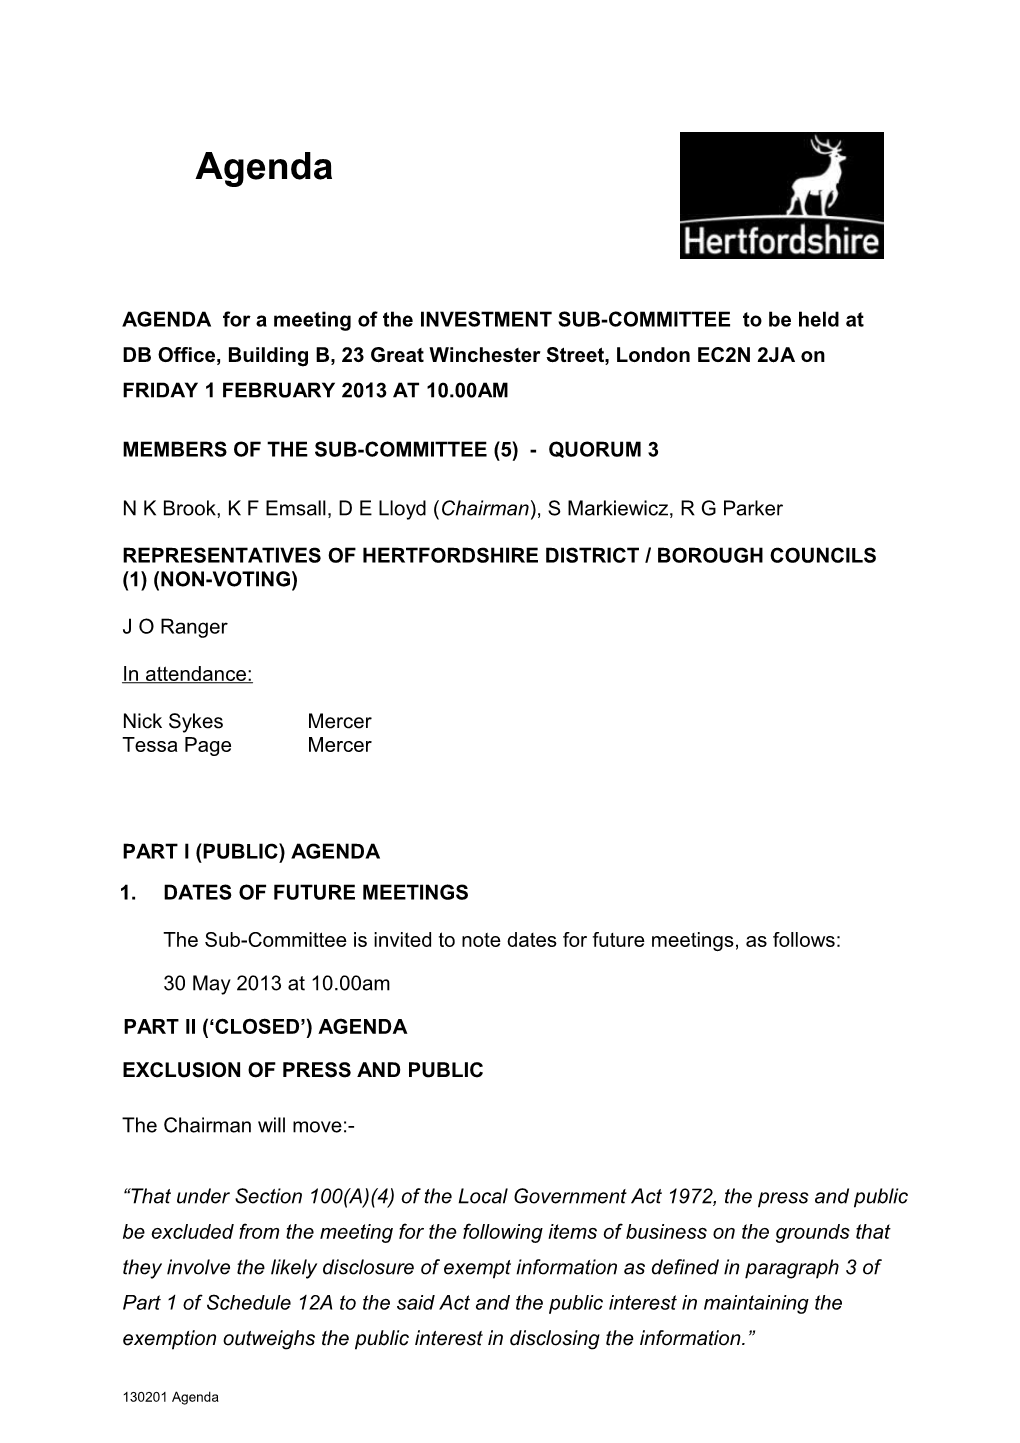 Agenda for a Meeting of the Investment Sub-Committee to Be Held on Thursday 24 May 2012